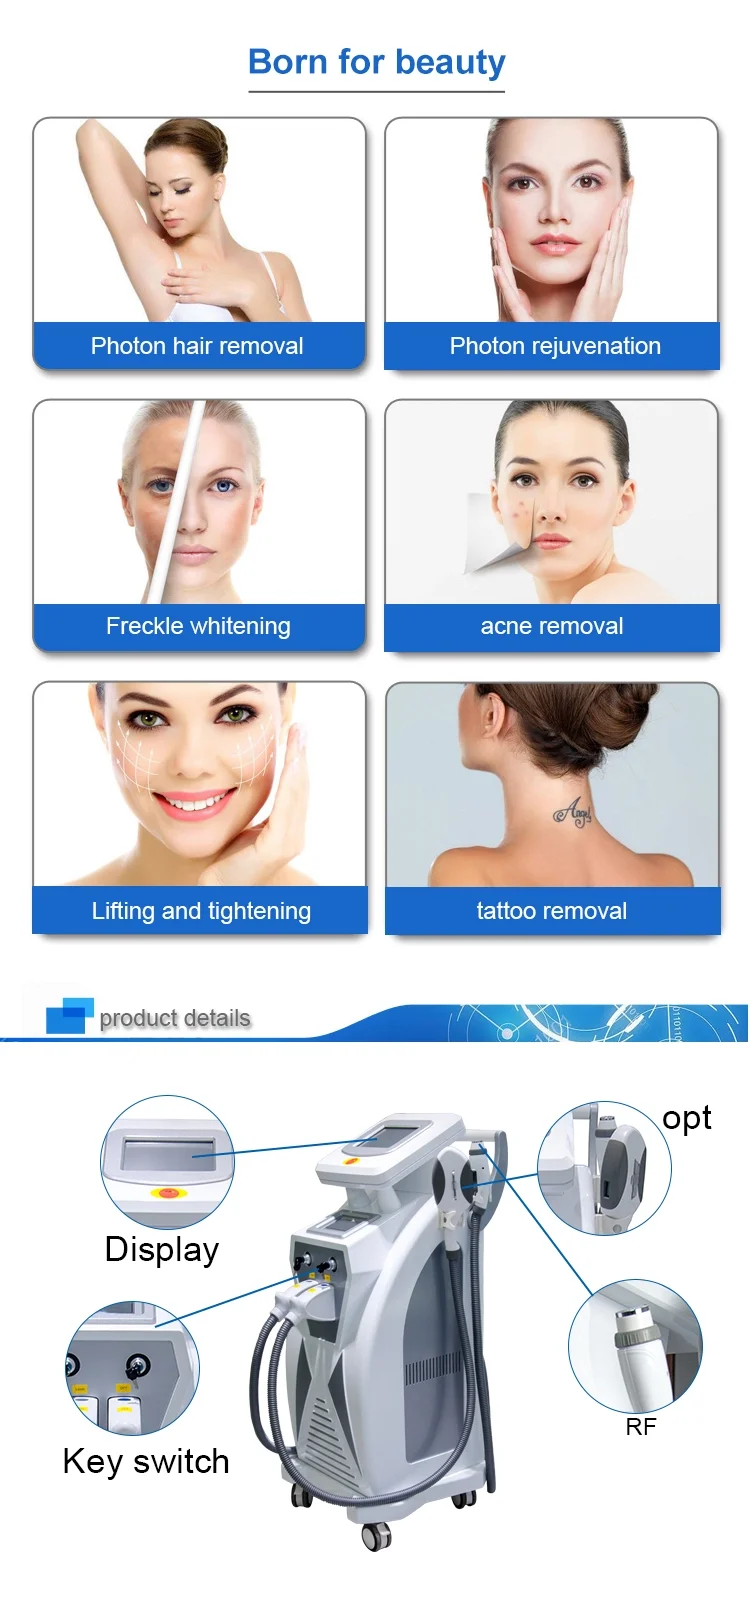 Multifunctional Permanent Hair Remover SHR OPT IPL Hair Removal Machine For Beauty Salon